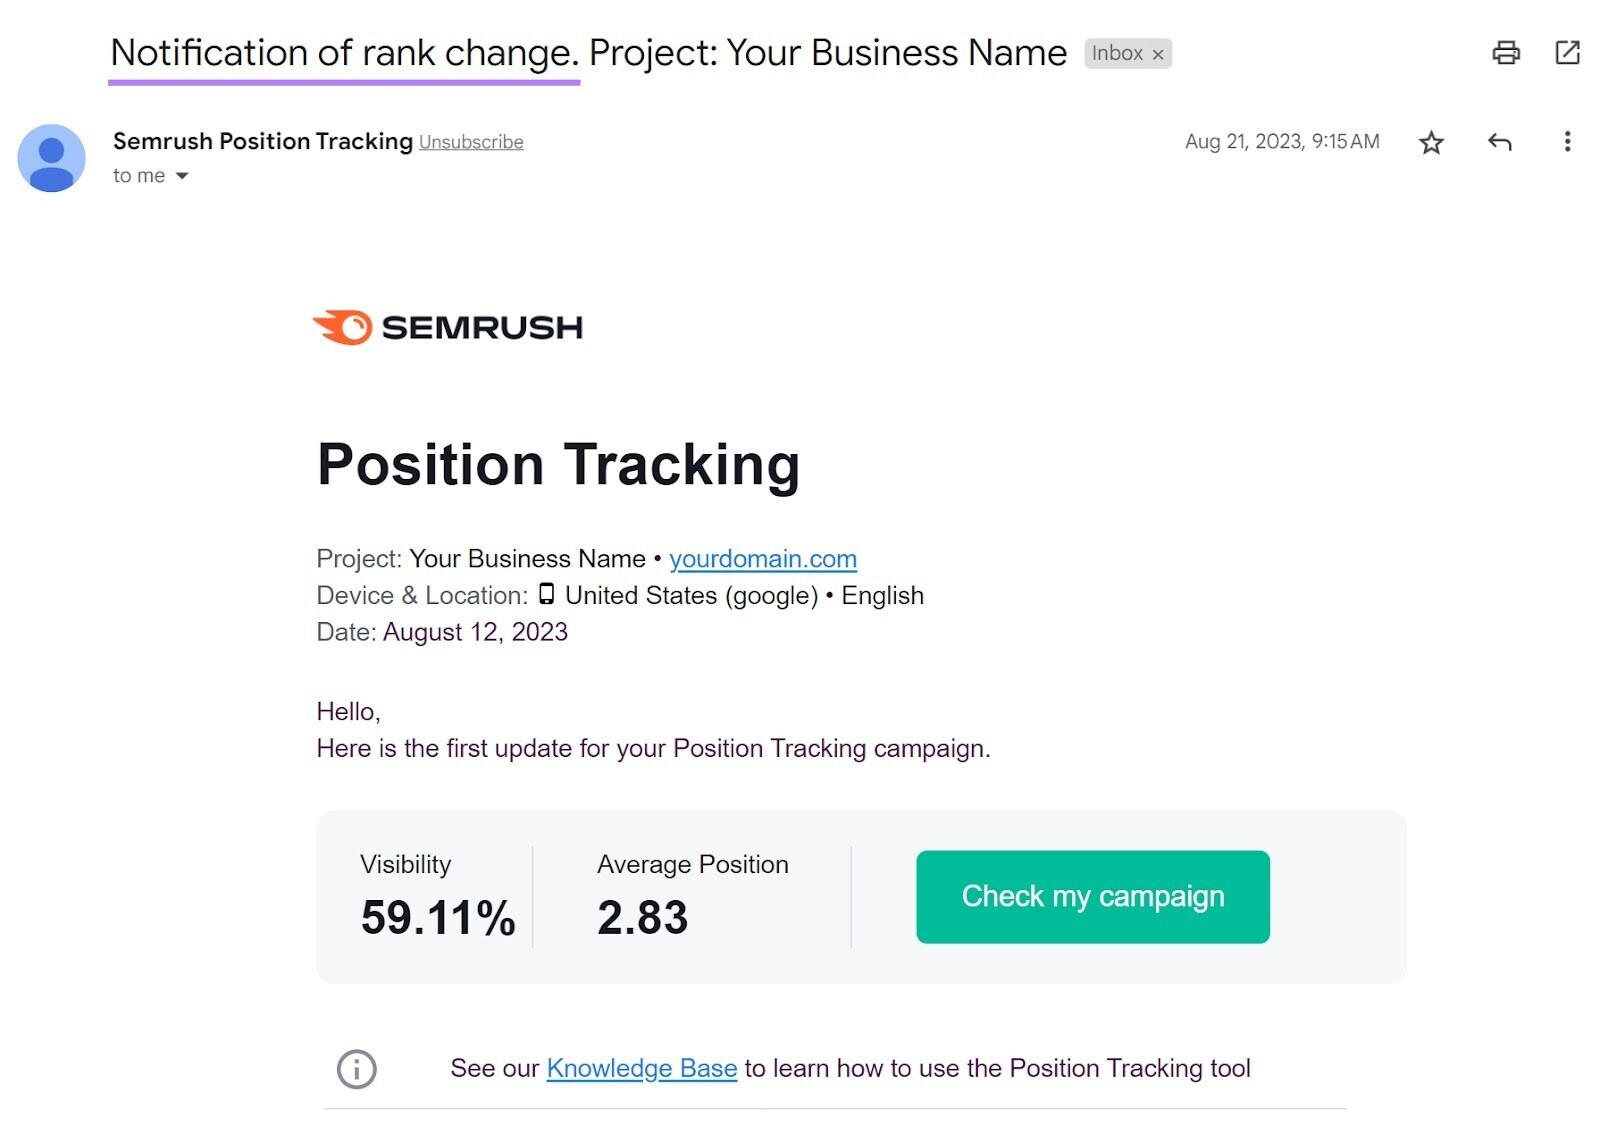 Position Tracking email notification